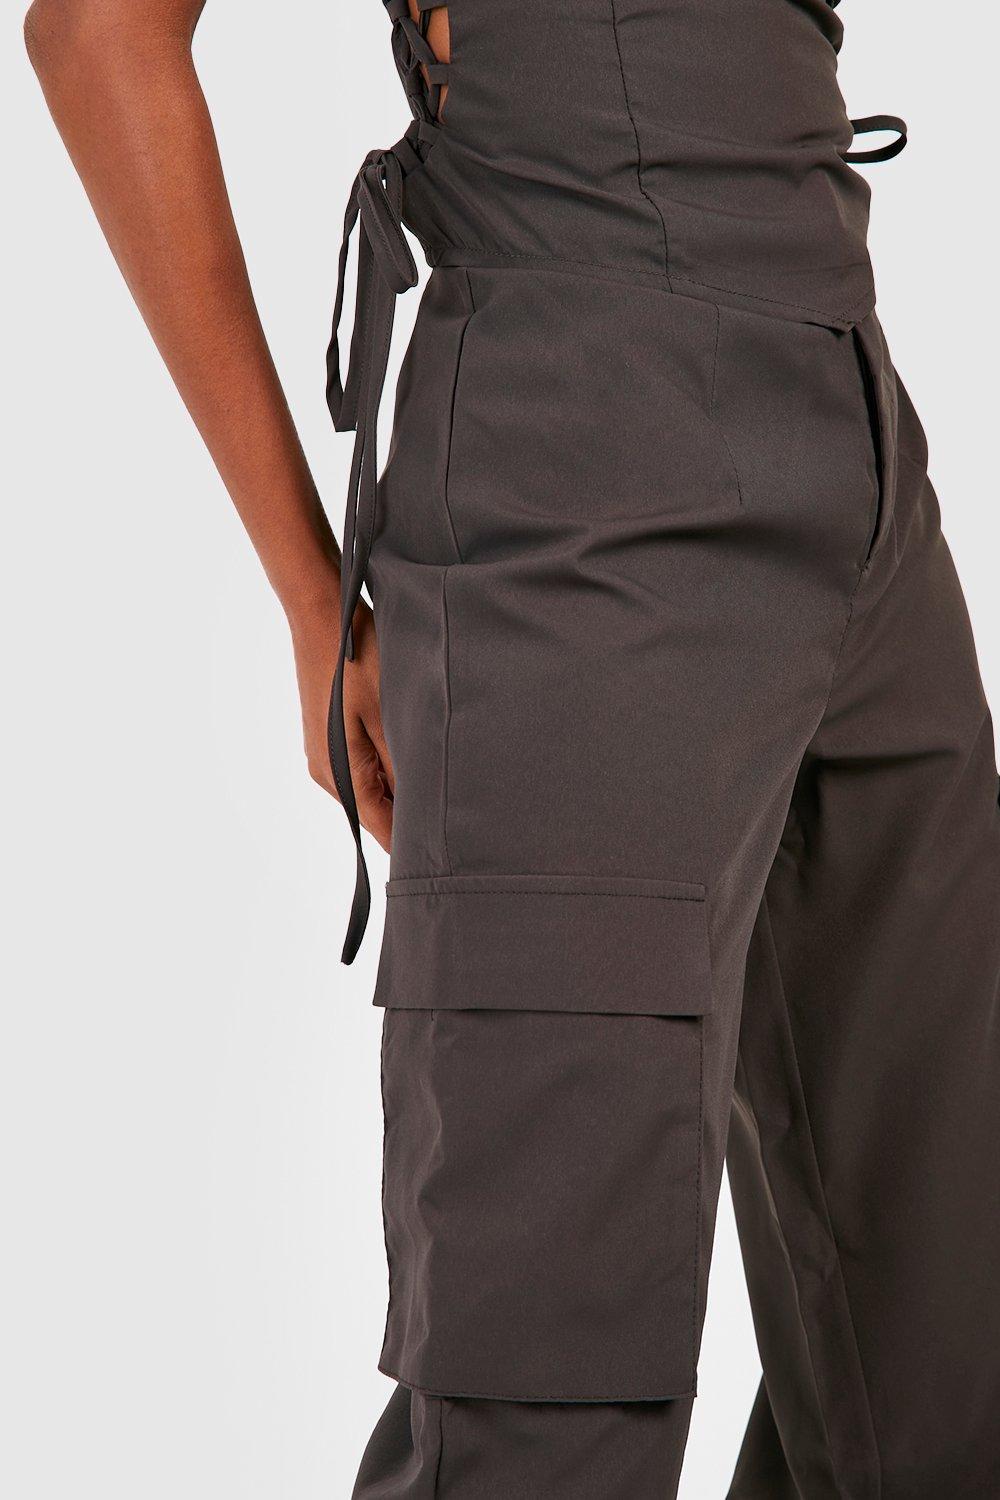 Women's Relaxed Fit Cargo Pants